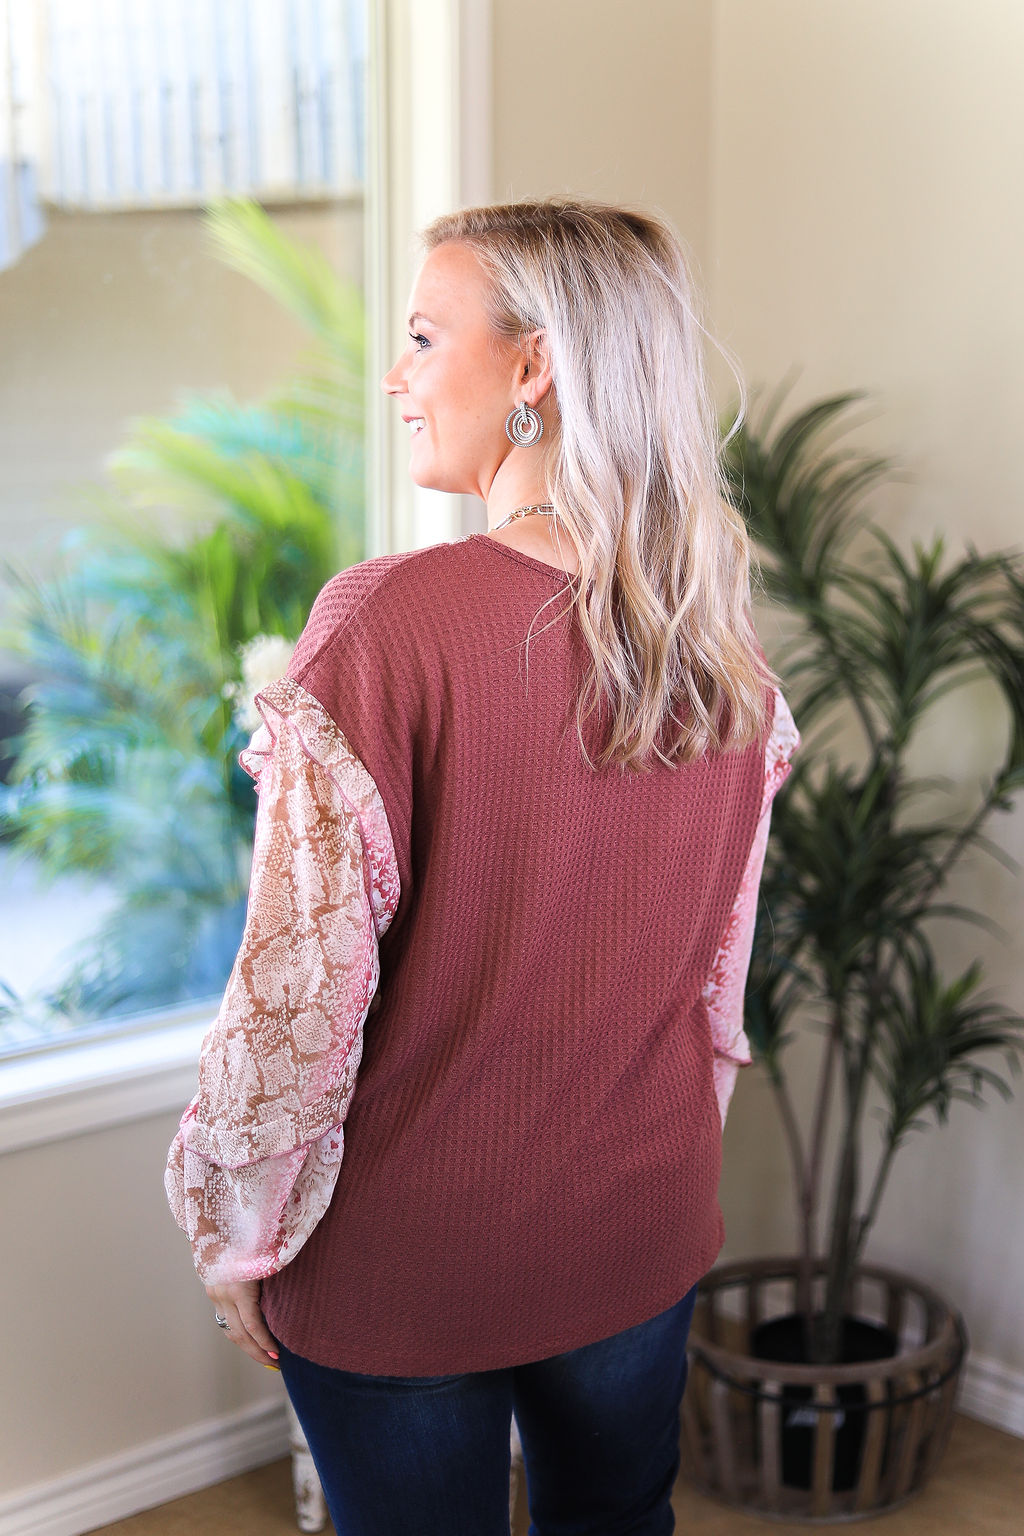 Last Chance Size Small & Large | Secret Crush Waffle Knit Blouse with Sheer Snakeskin Puff Sleeves in Mauve Pink - Giddy Up Glamour Boutique